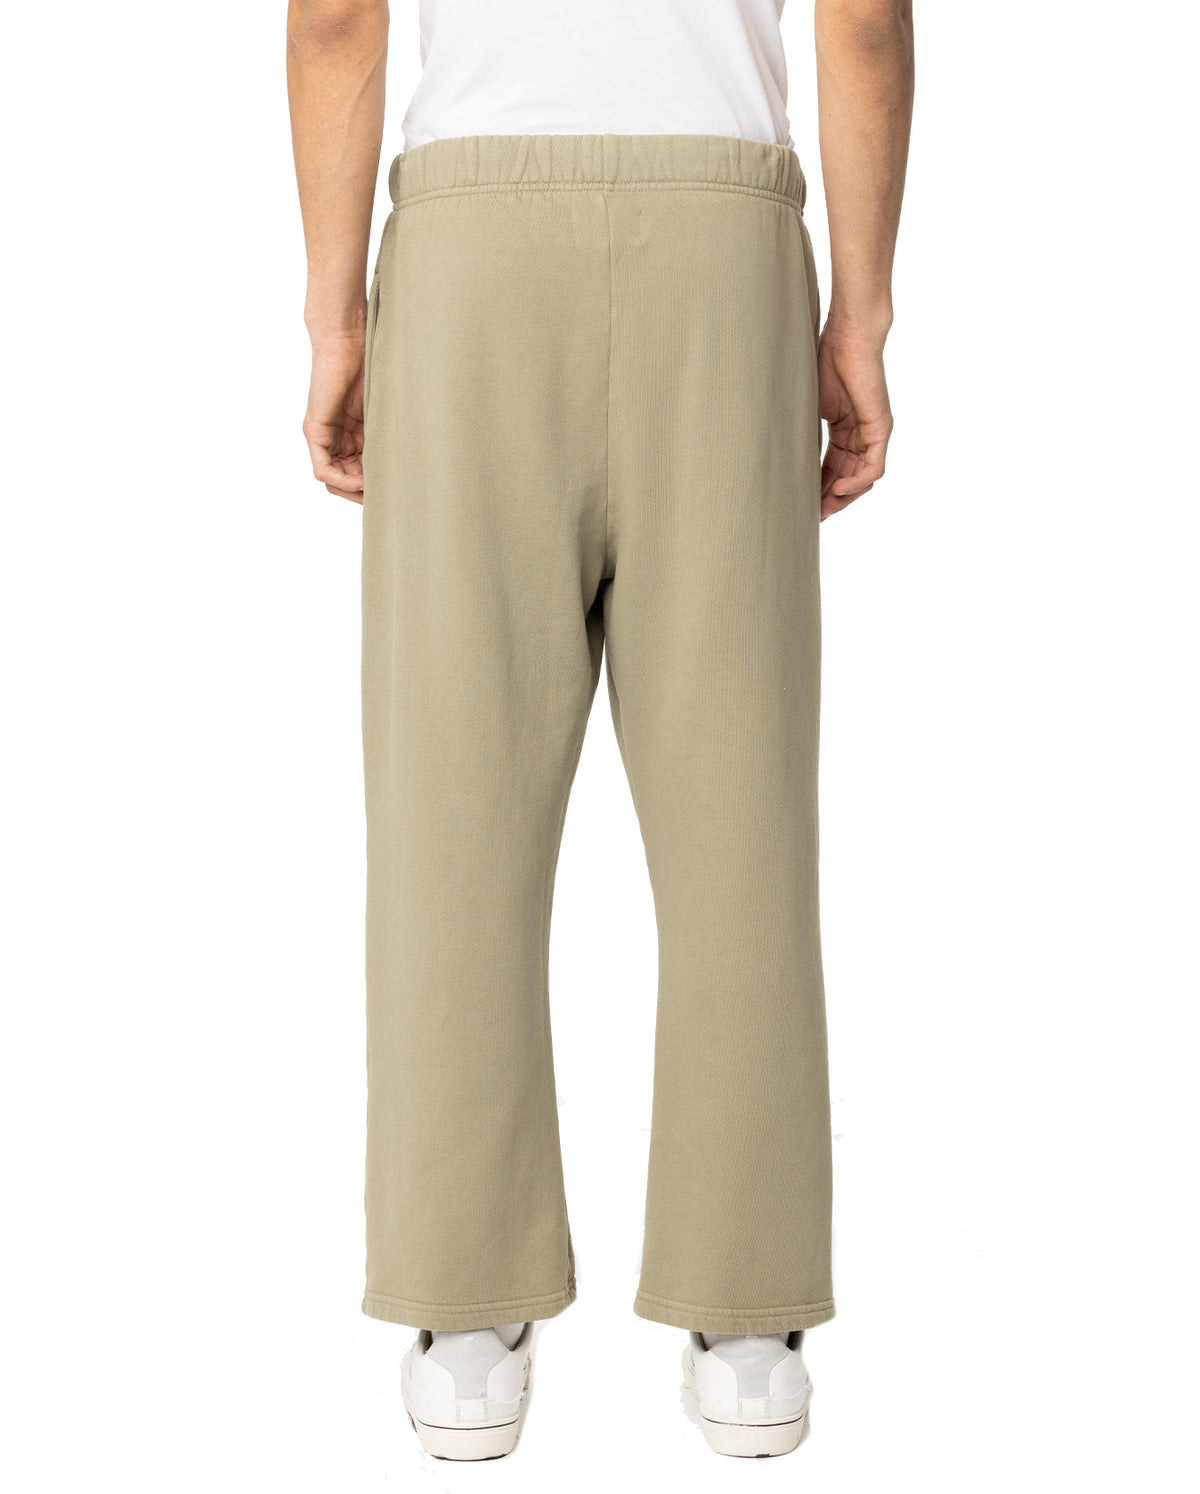 Cropped Relax Pant - Citron Sage